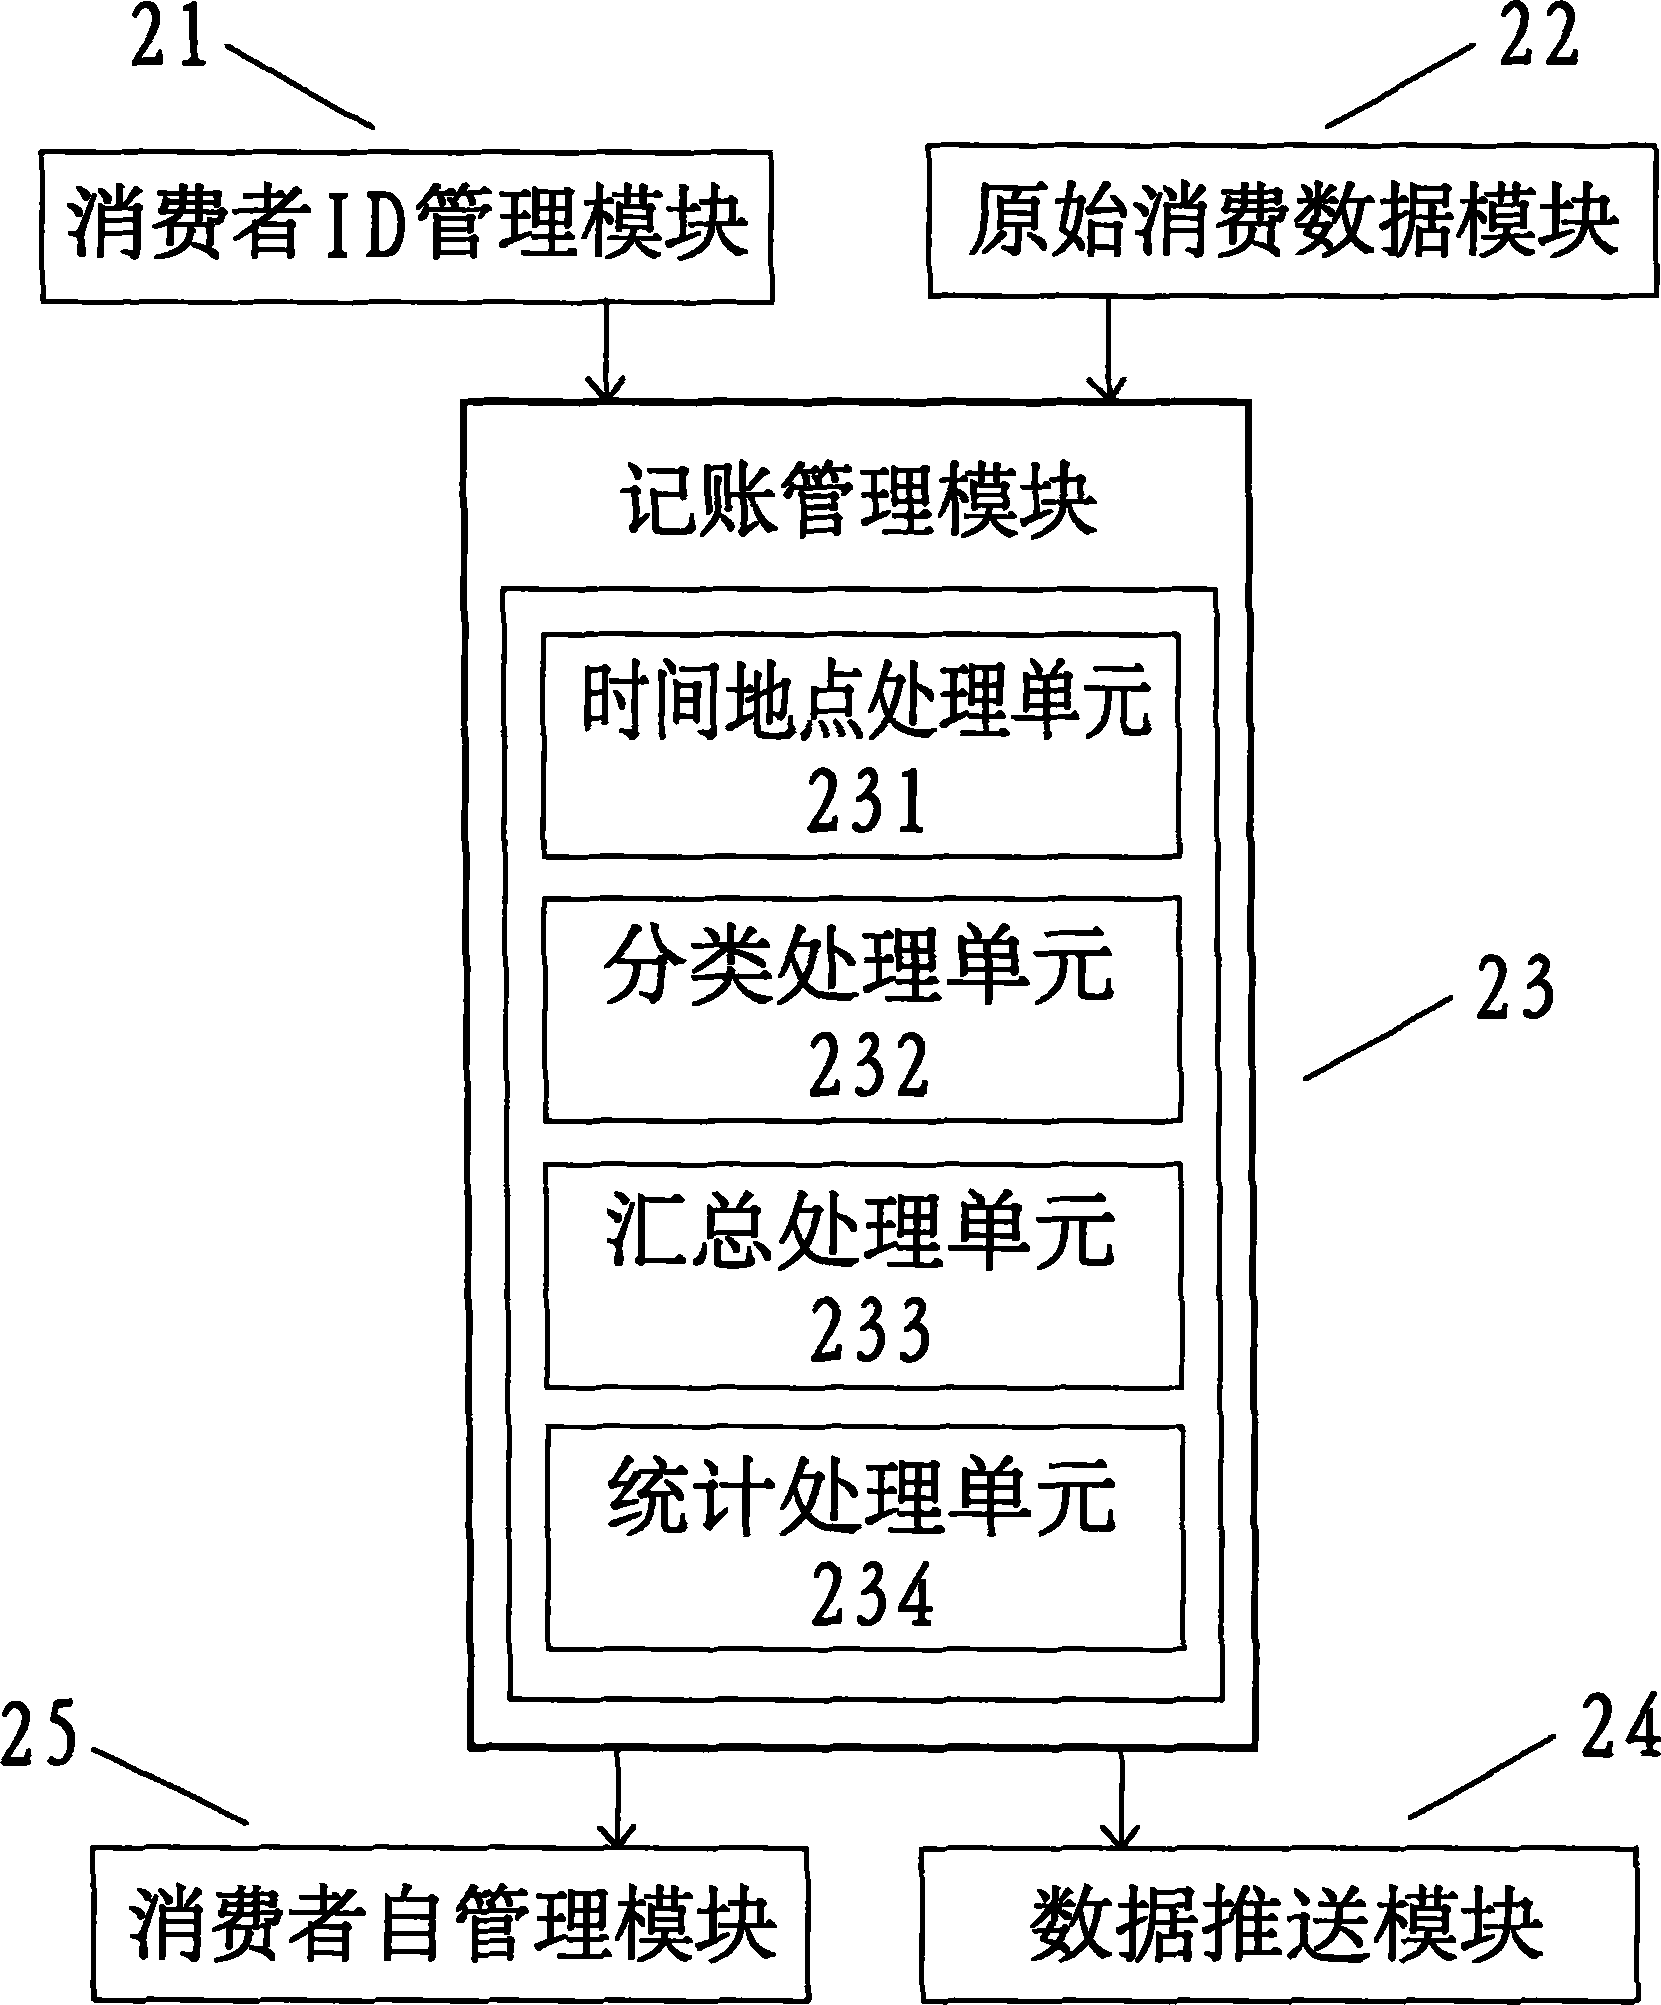 System and method for automatically accounting consumption data (records) of consumer